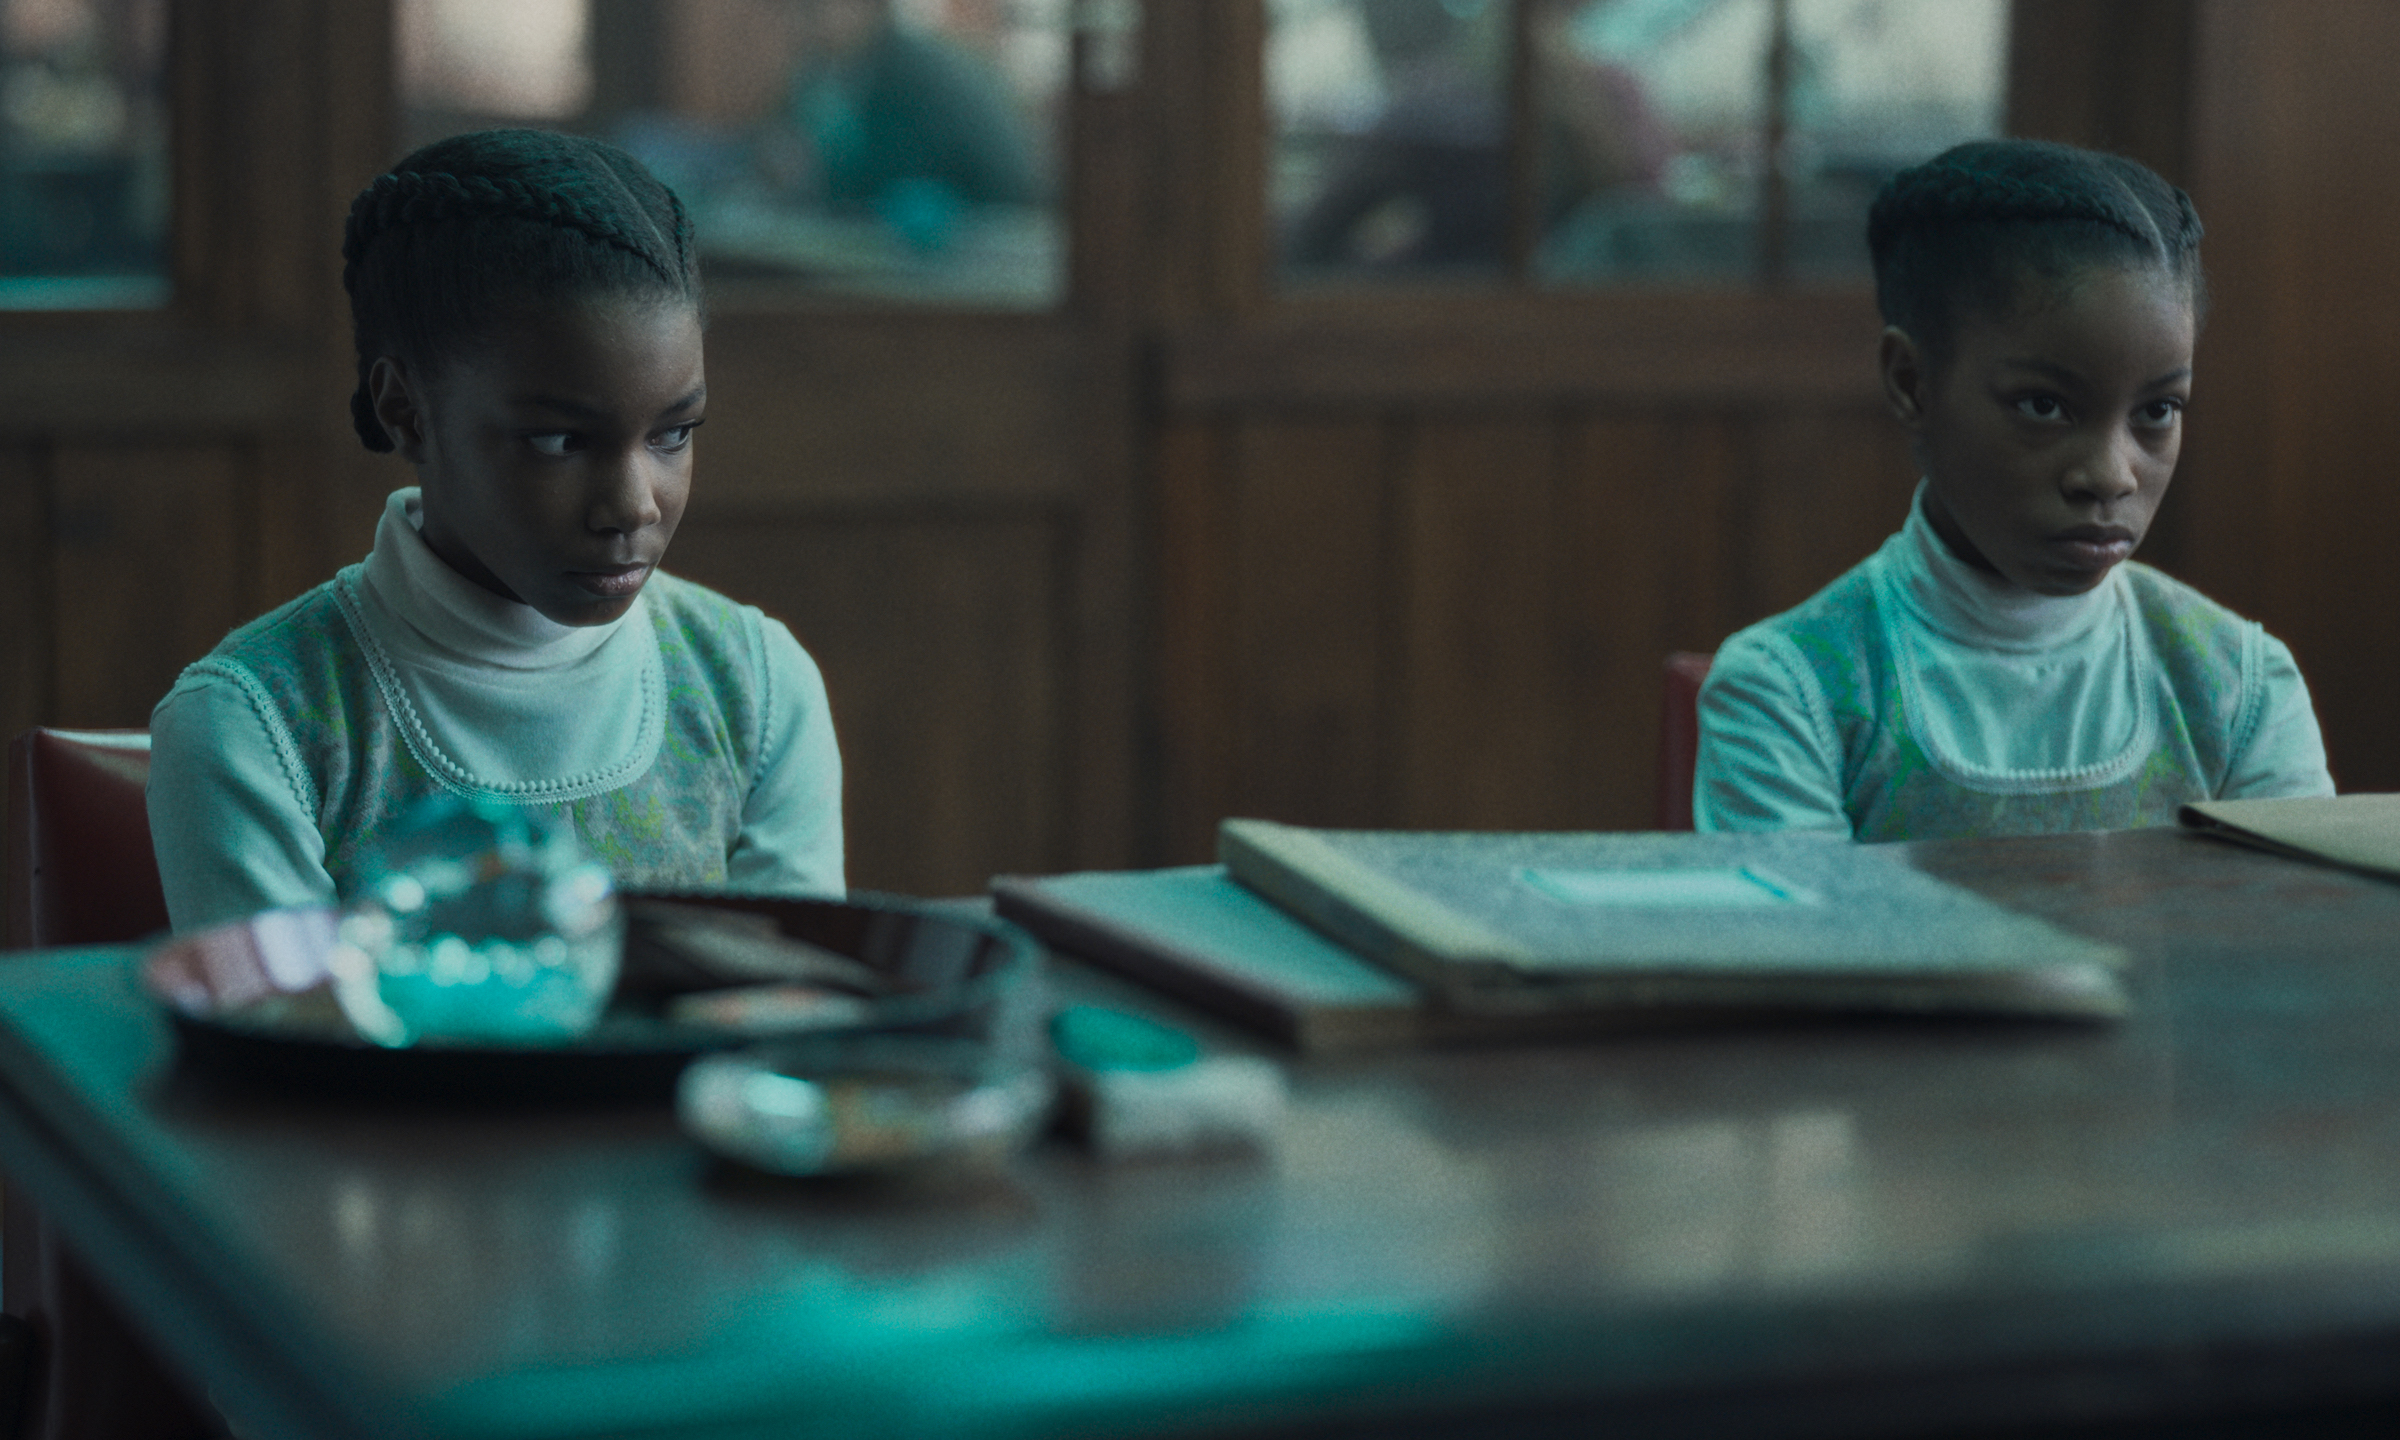 Leah Mondesire Simmons as young June Gibbons and Eva-Ariana Baxter as young Jennifer Gibbons in The Silent Twins (Jakub Kijowski—Focus Features)